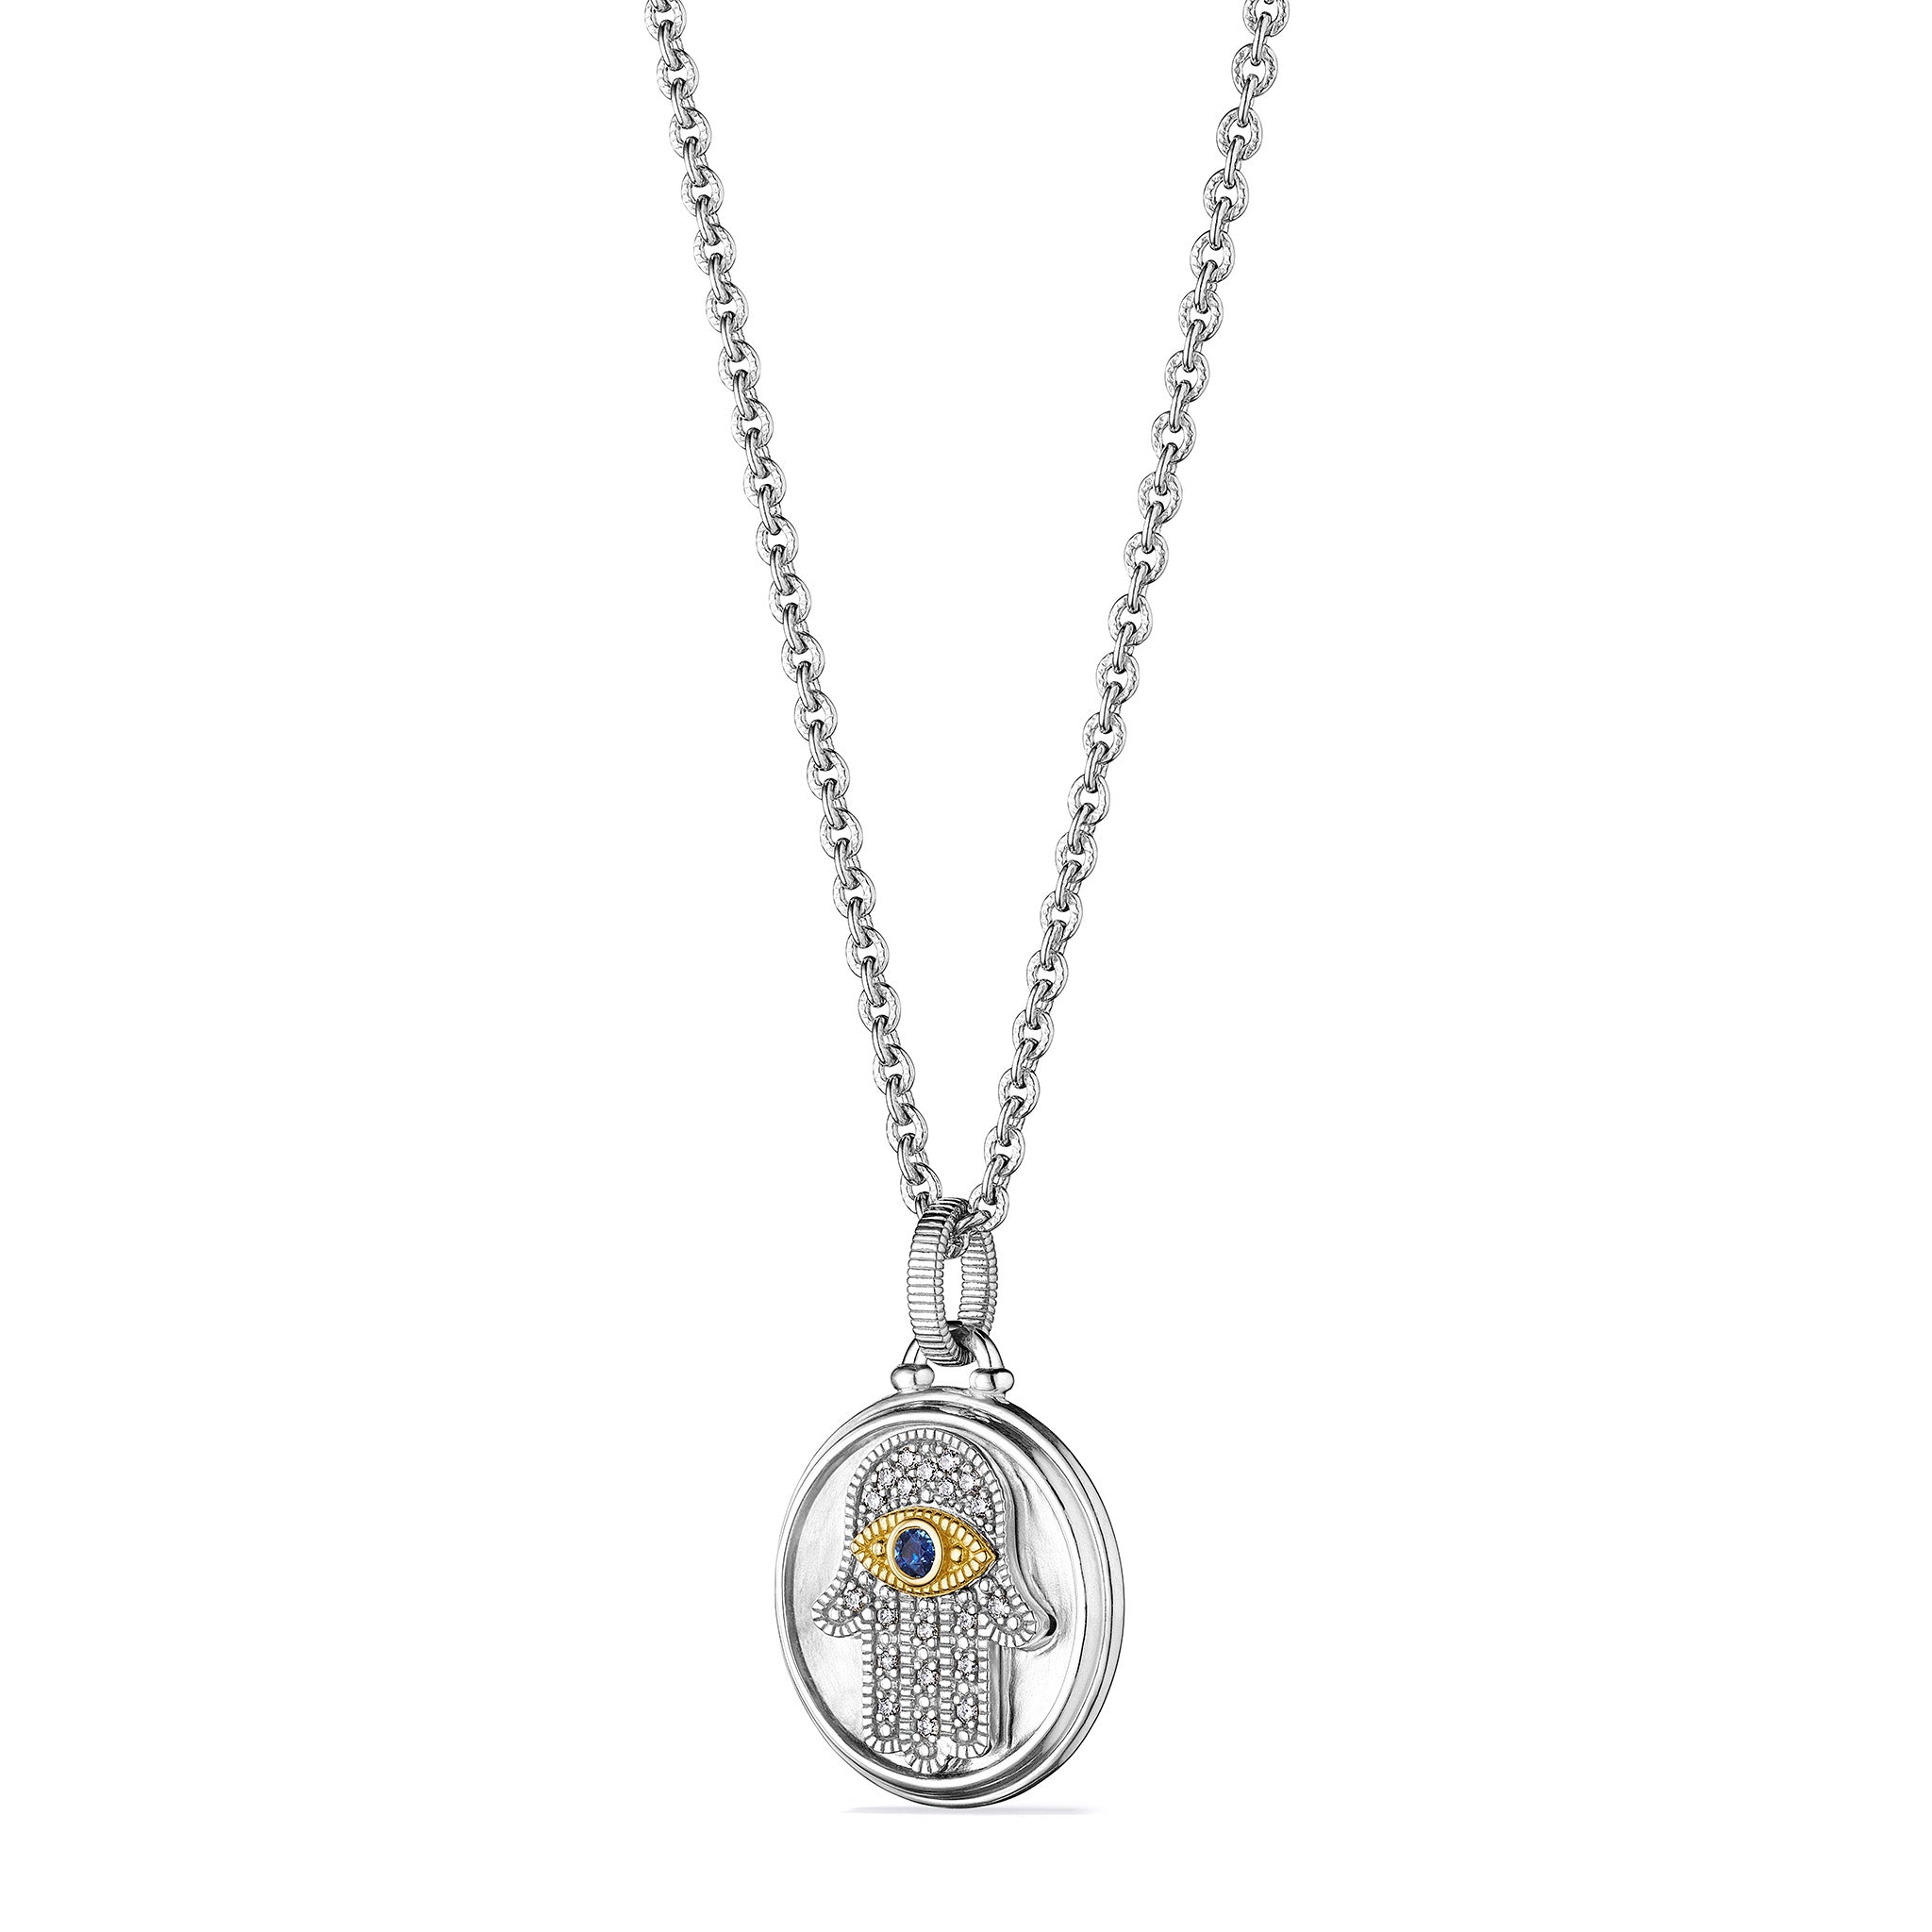 Little Luxuries Textured Hamsa Medallion Necklace with Blue Sapphire, Diamonds and 18K Gold